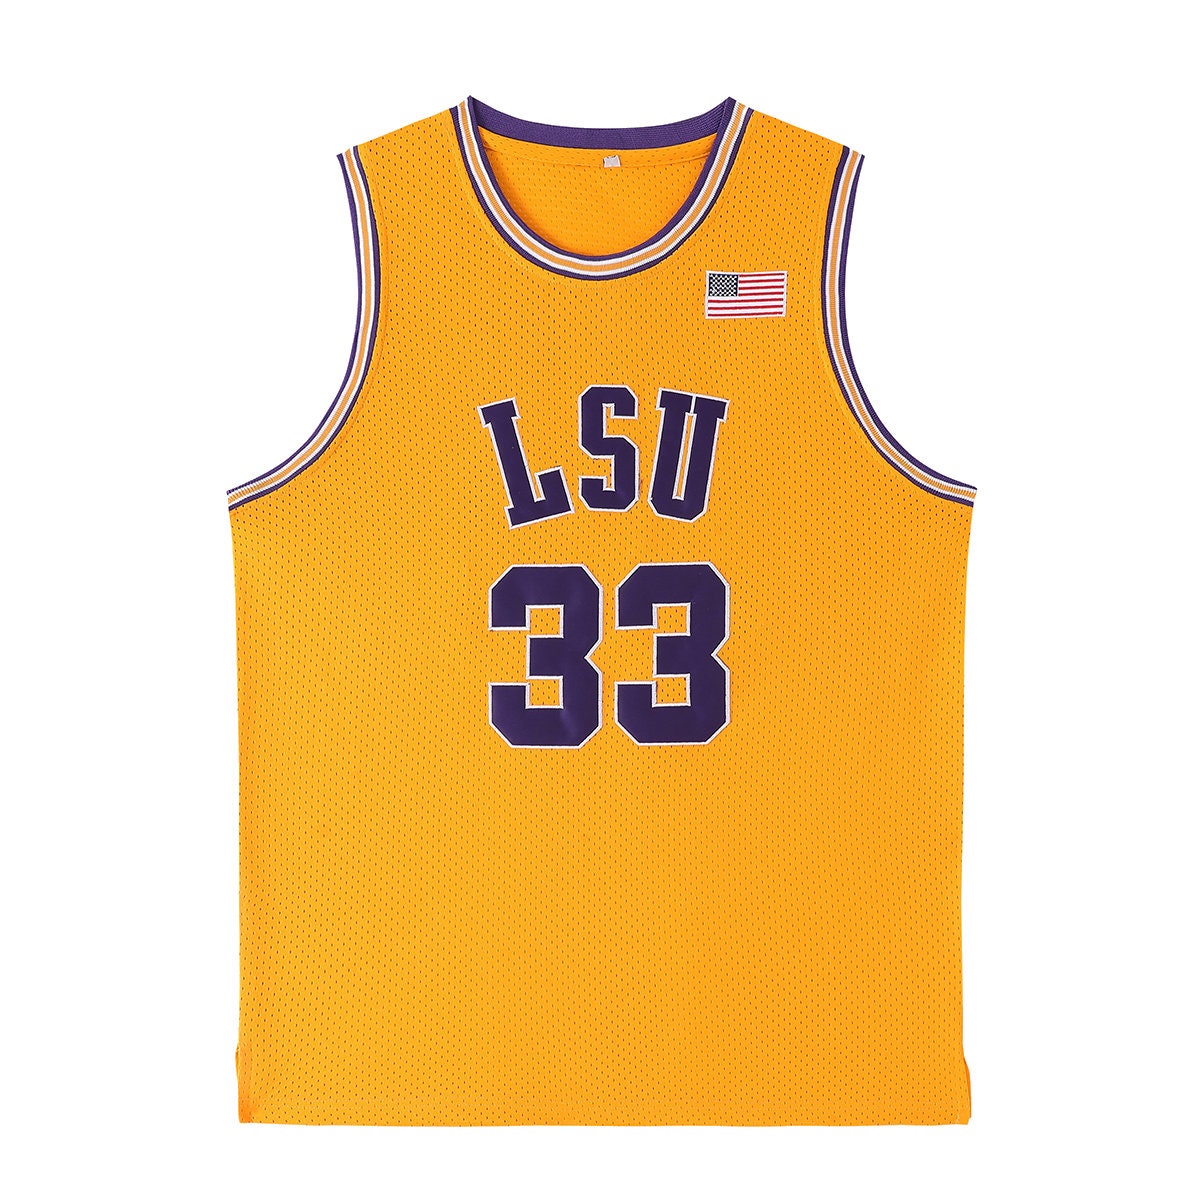 Shaquille O'Neal LSU Basketball Jersey College